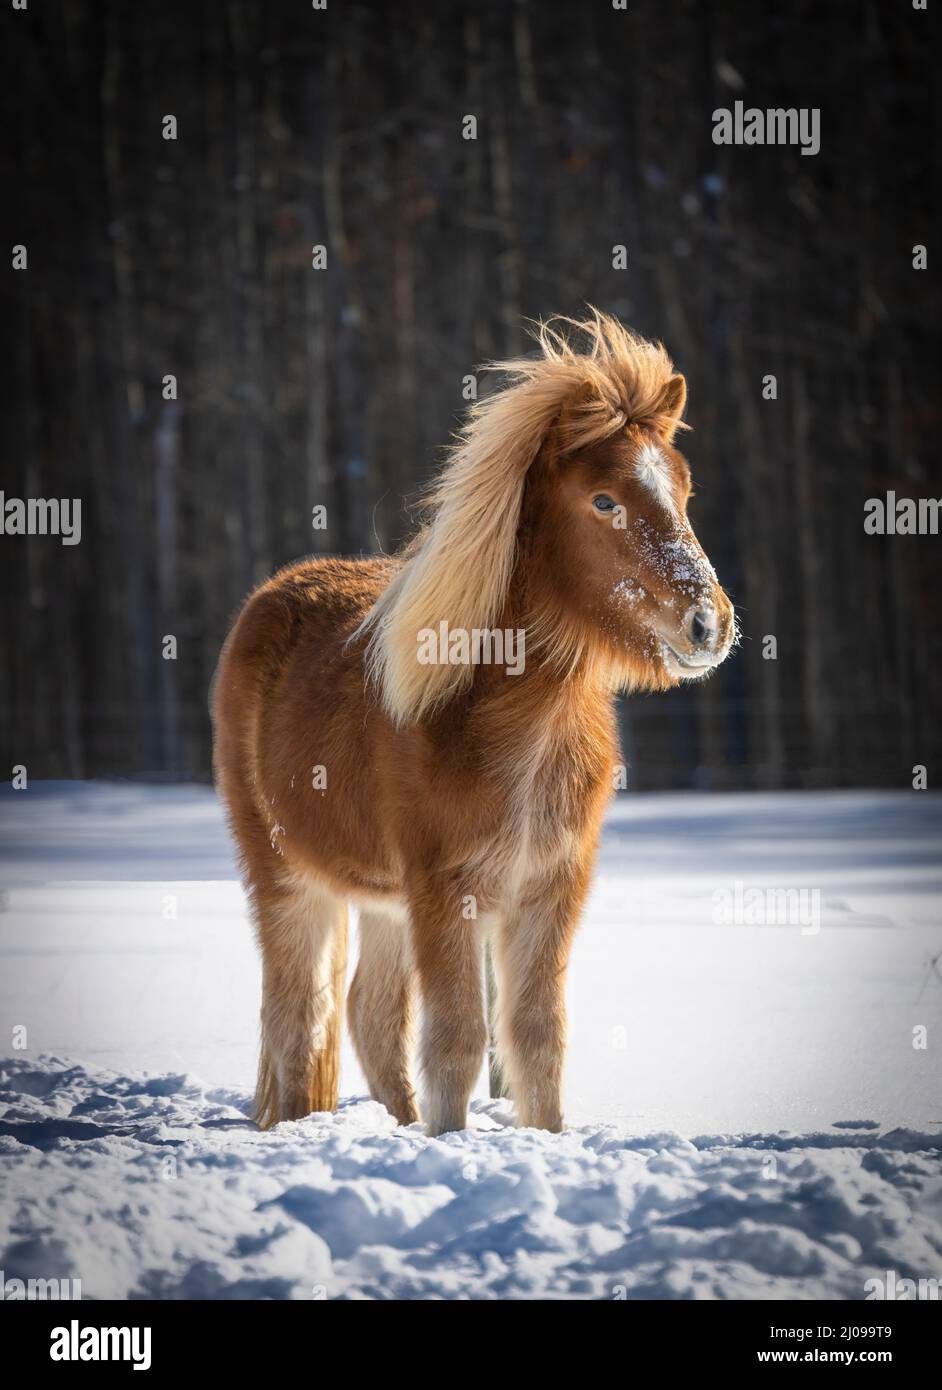 Chestnut Icelandic horse filly standing in the snow Stock Photo